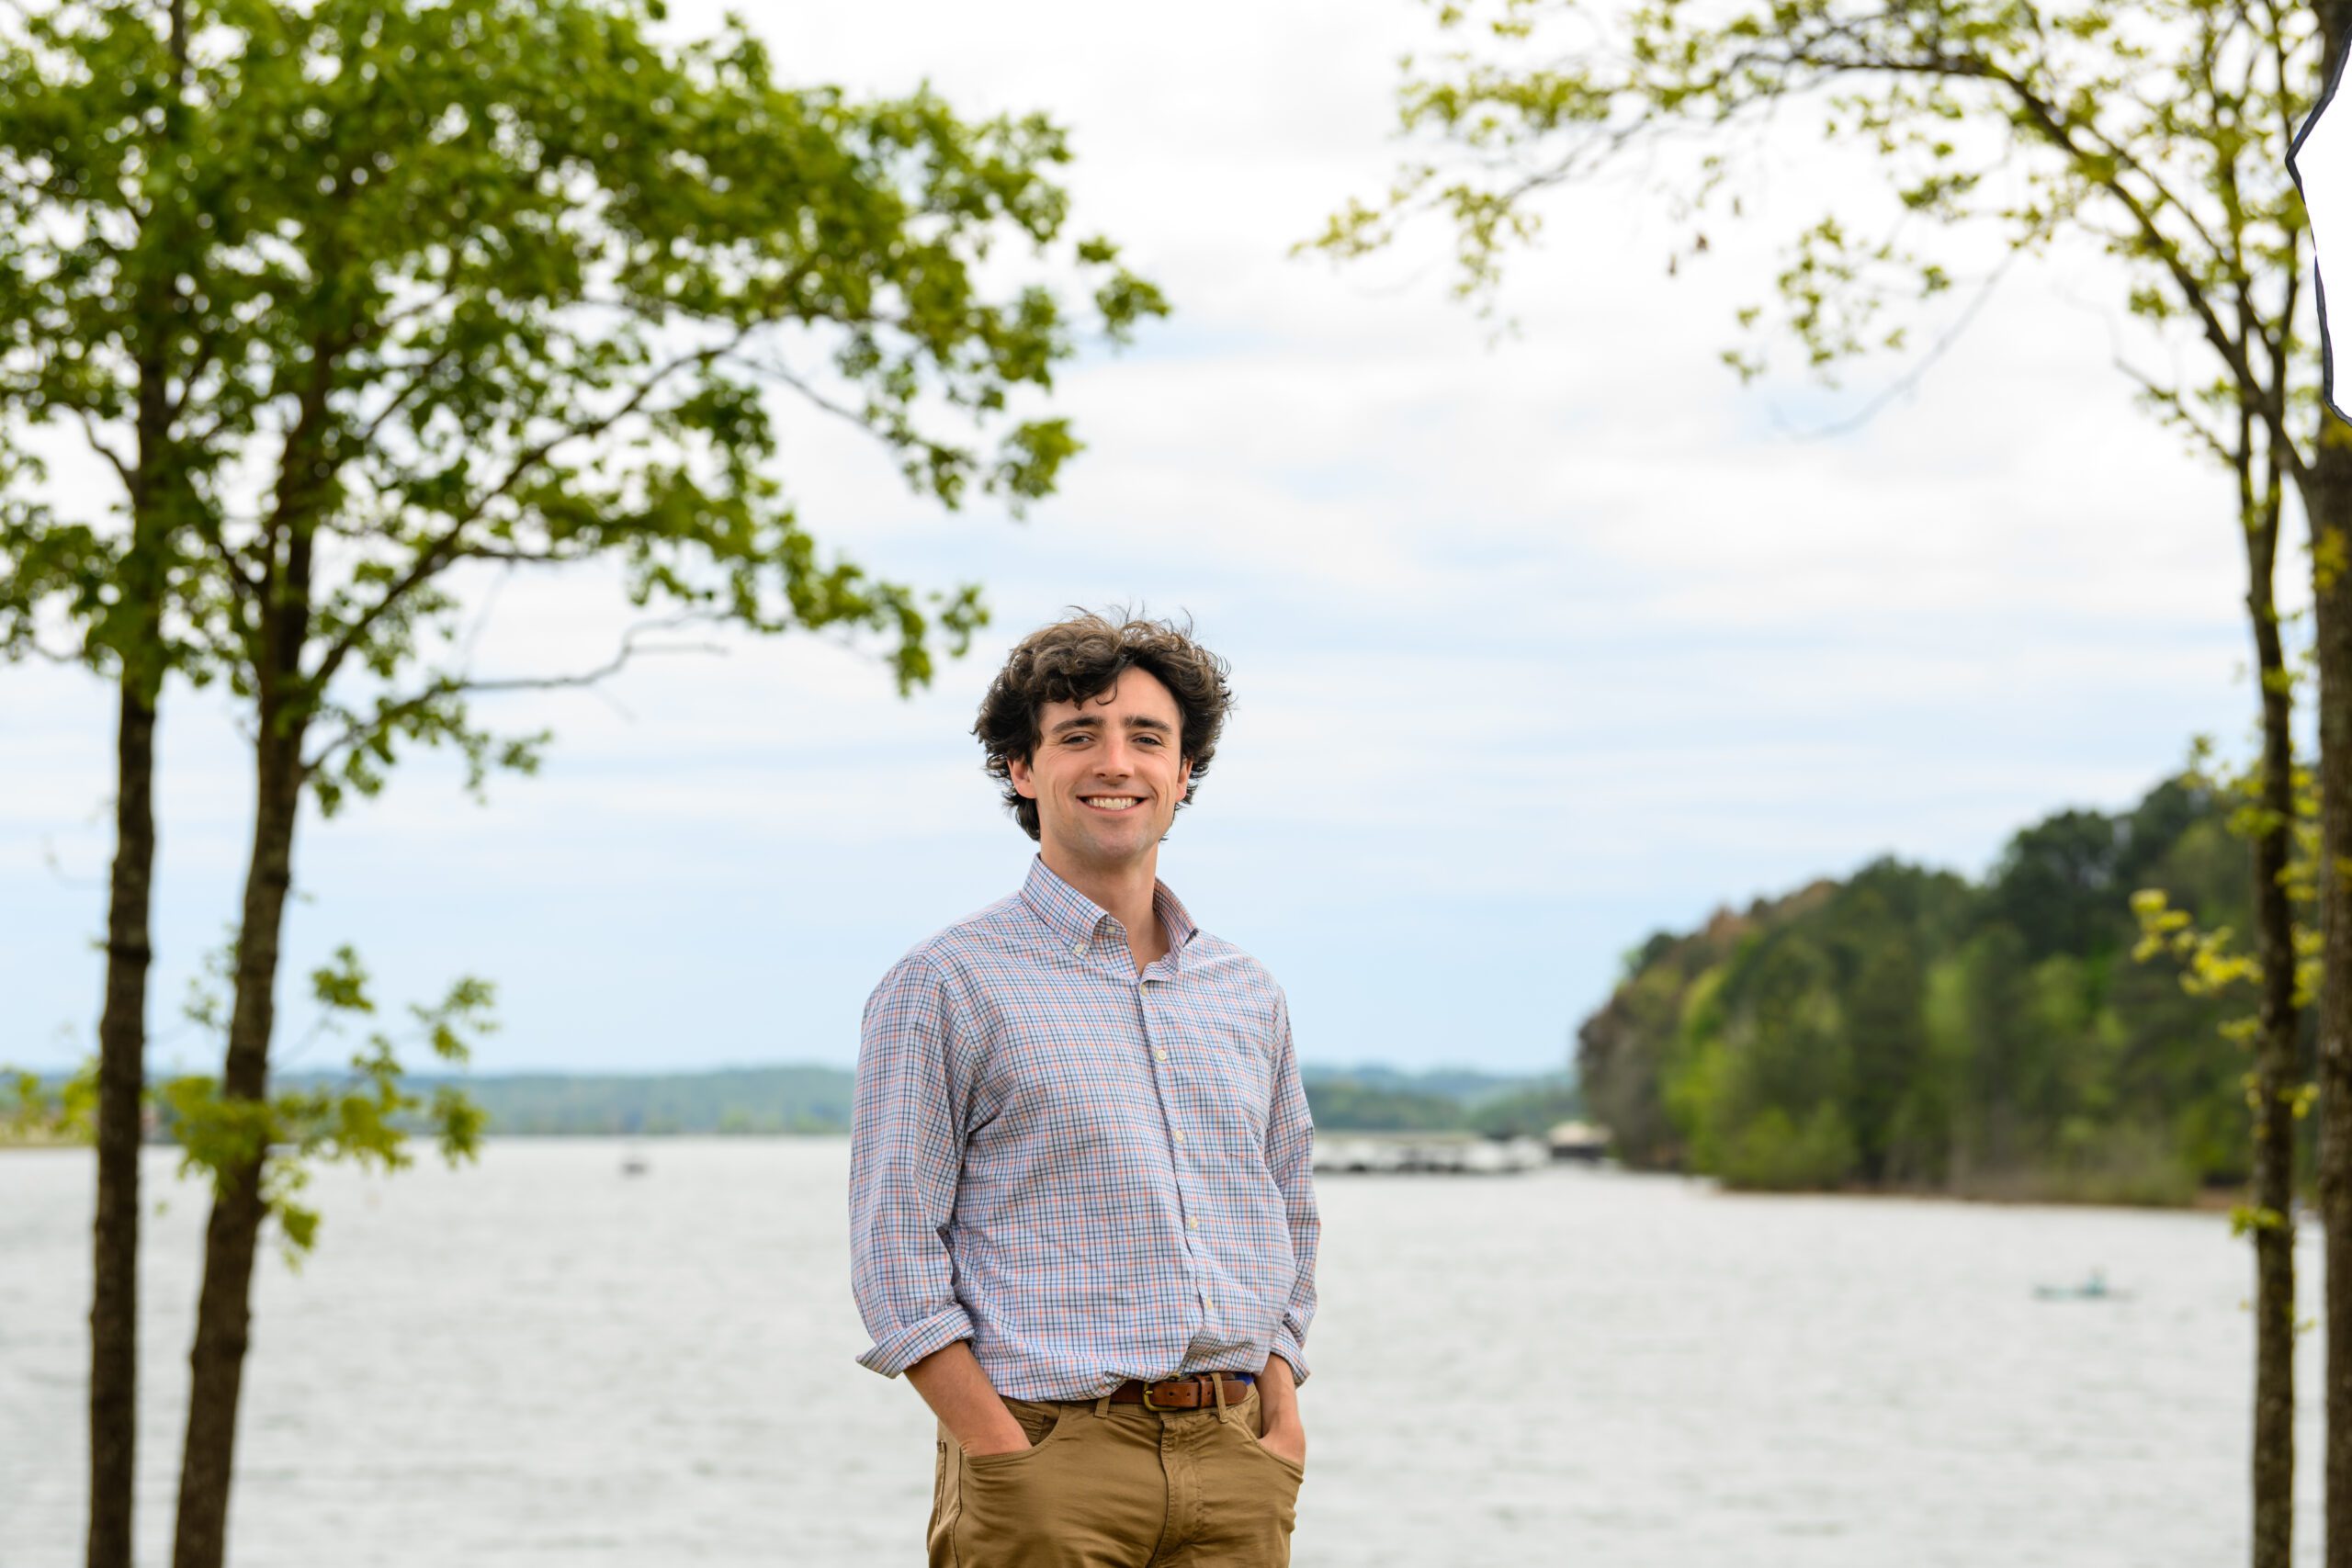 A male student wearing a light-colored dress shirt stands in front of a lake. His hands are in his pockets